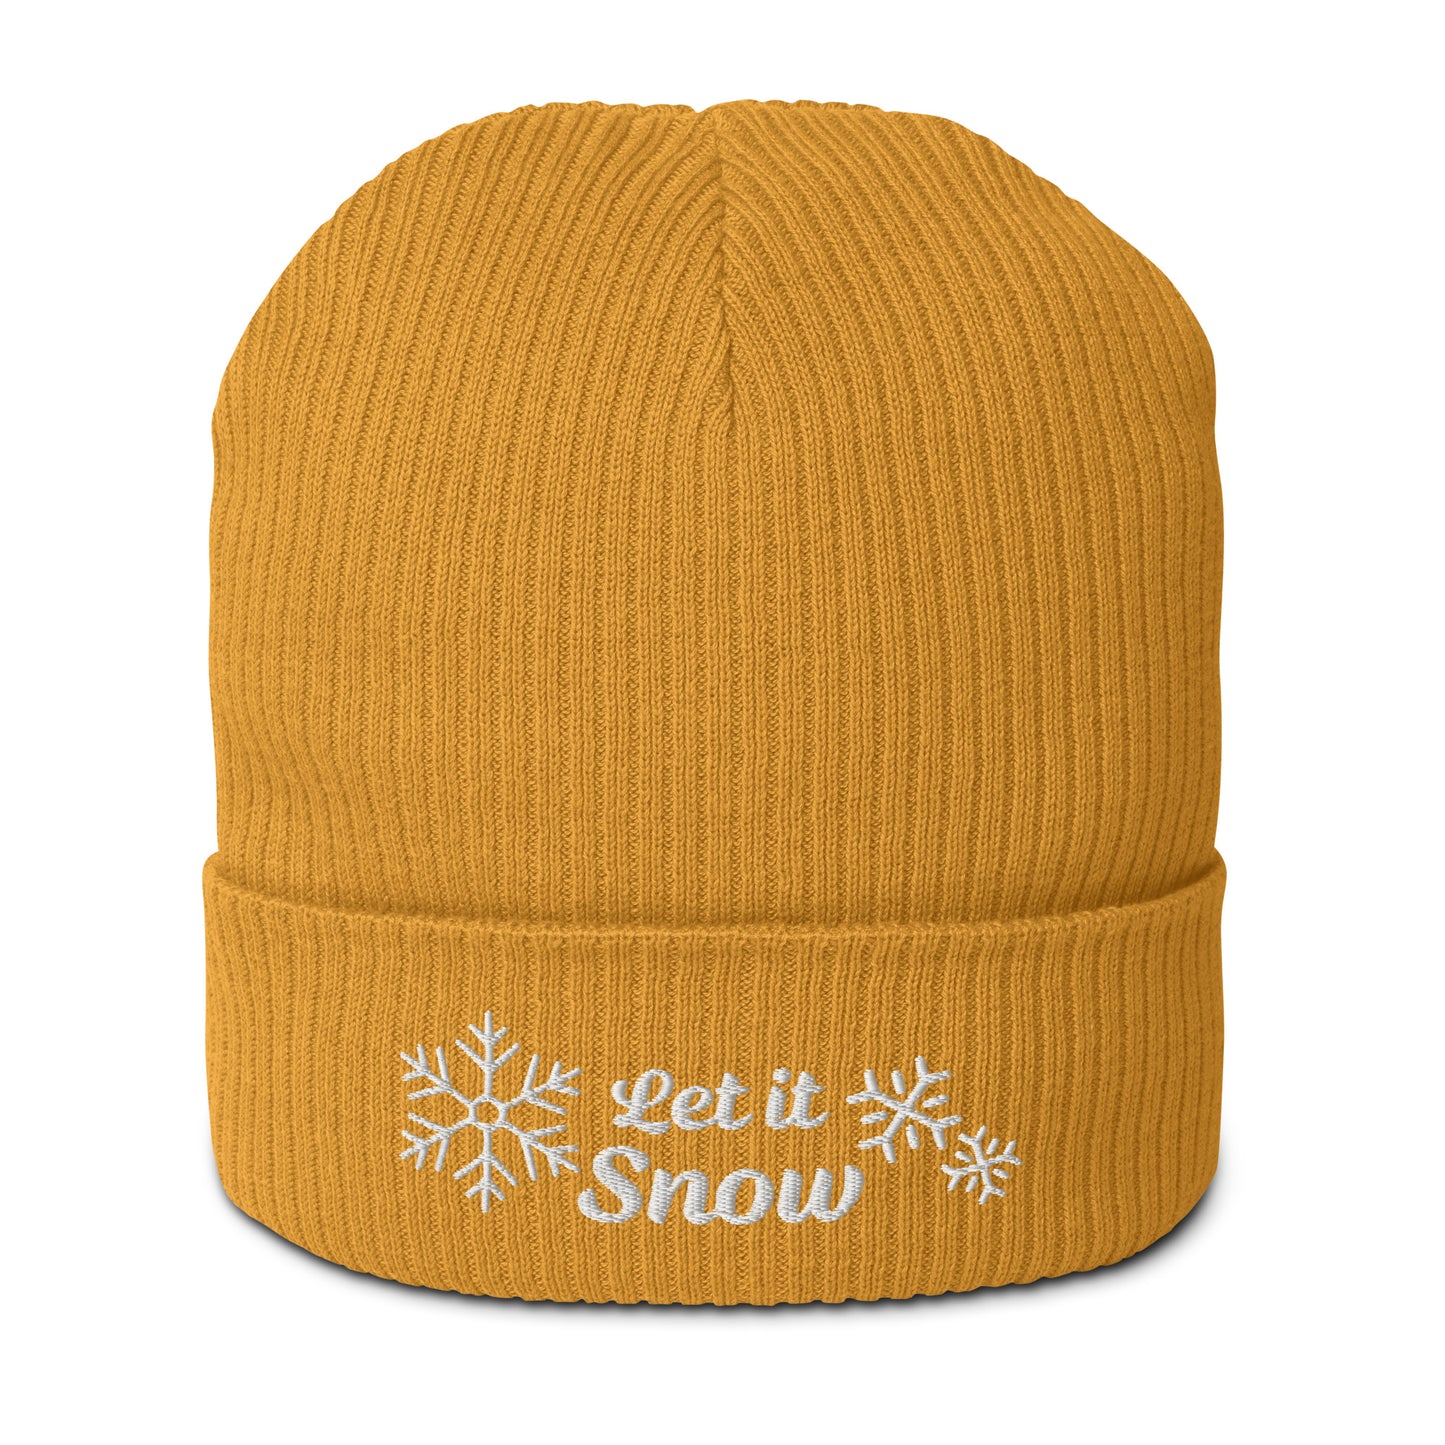 Let it snow embroidered organic ribbed beanie - cute gift idea for Christmas, for winter